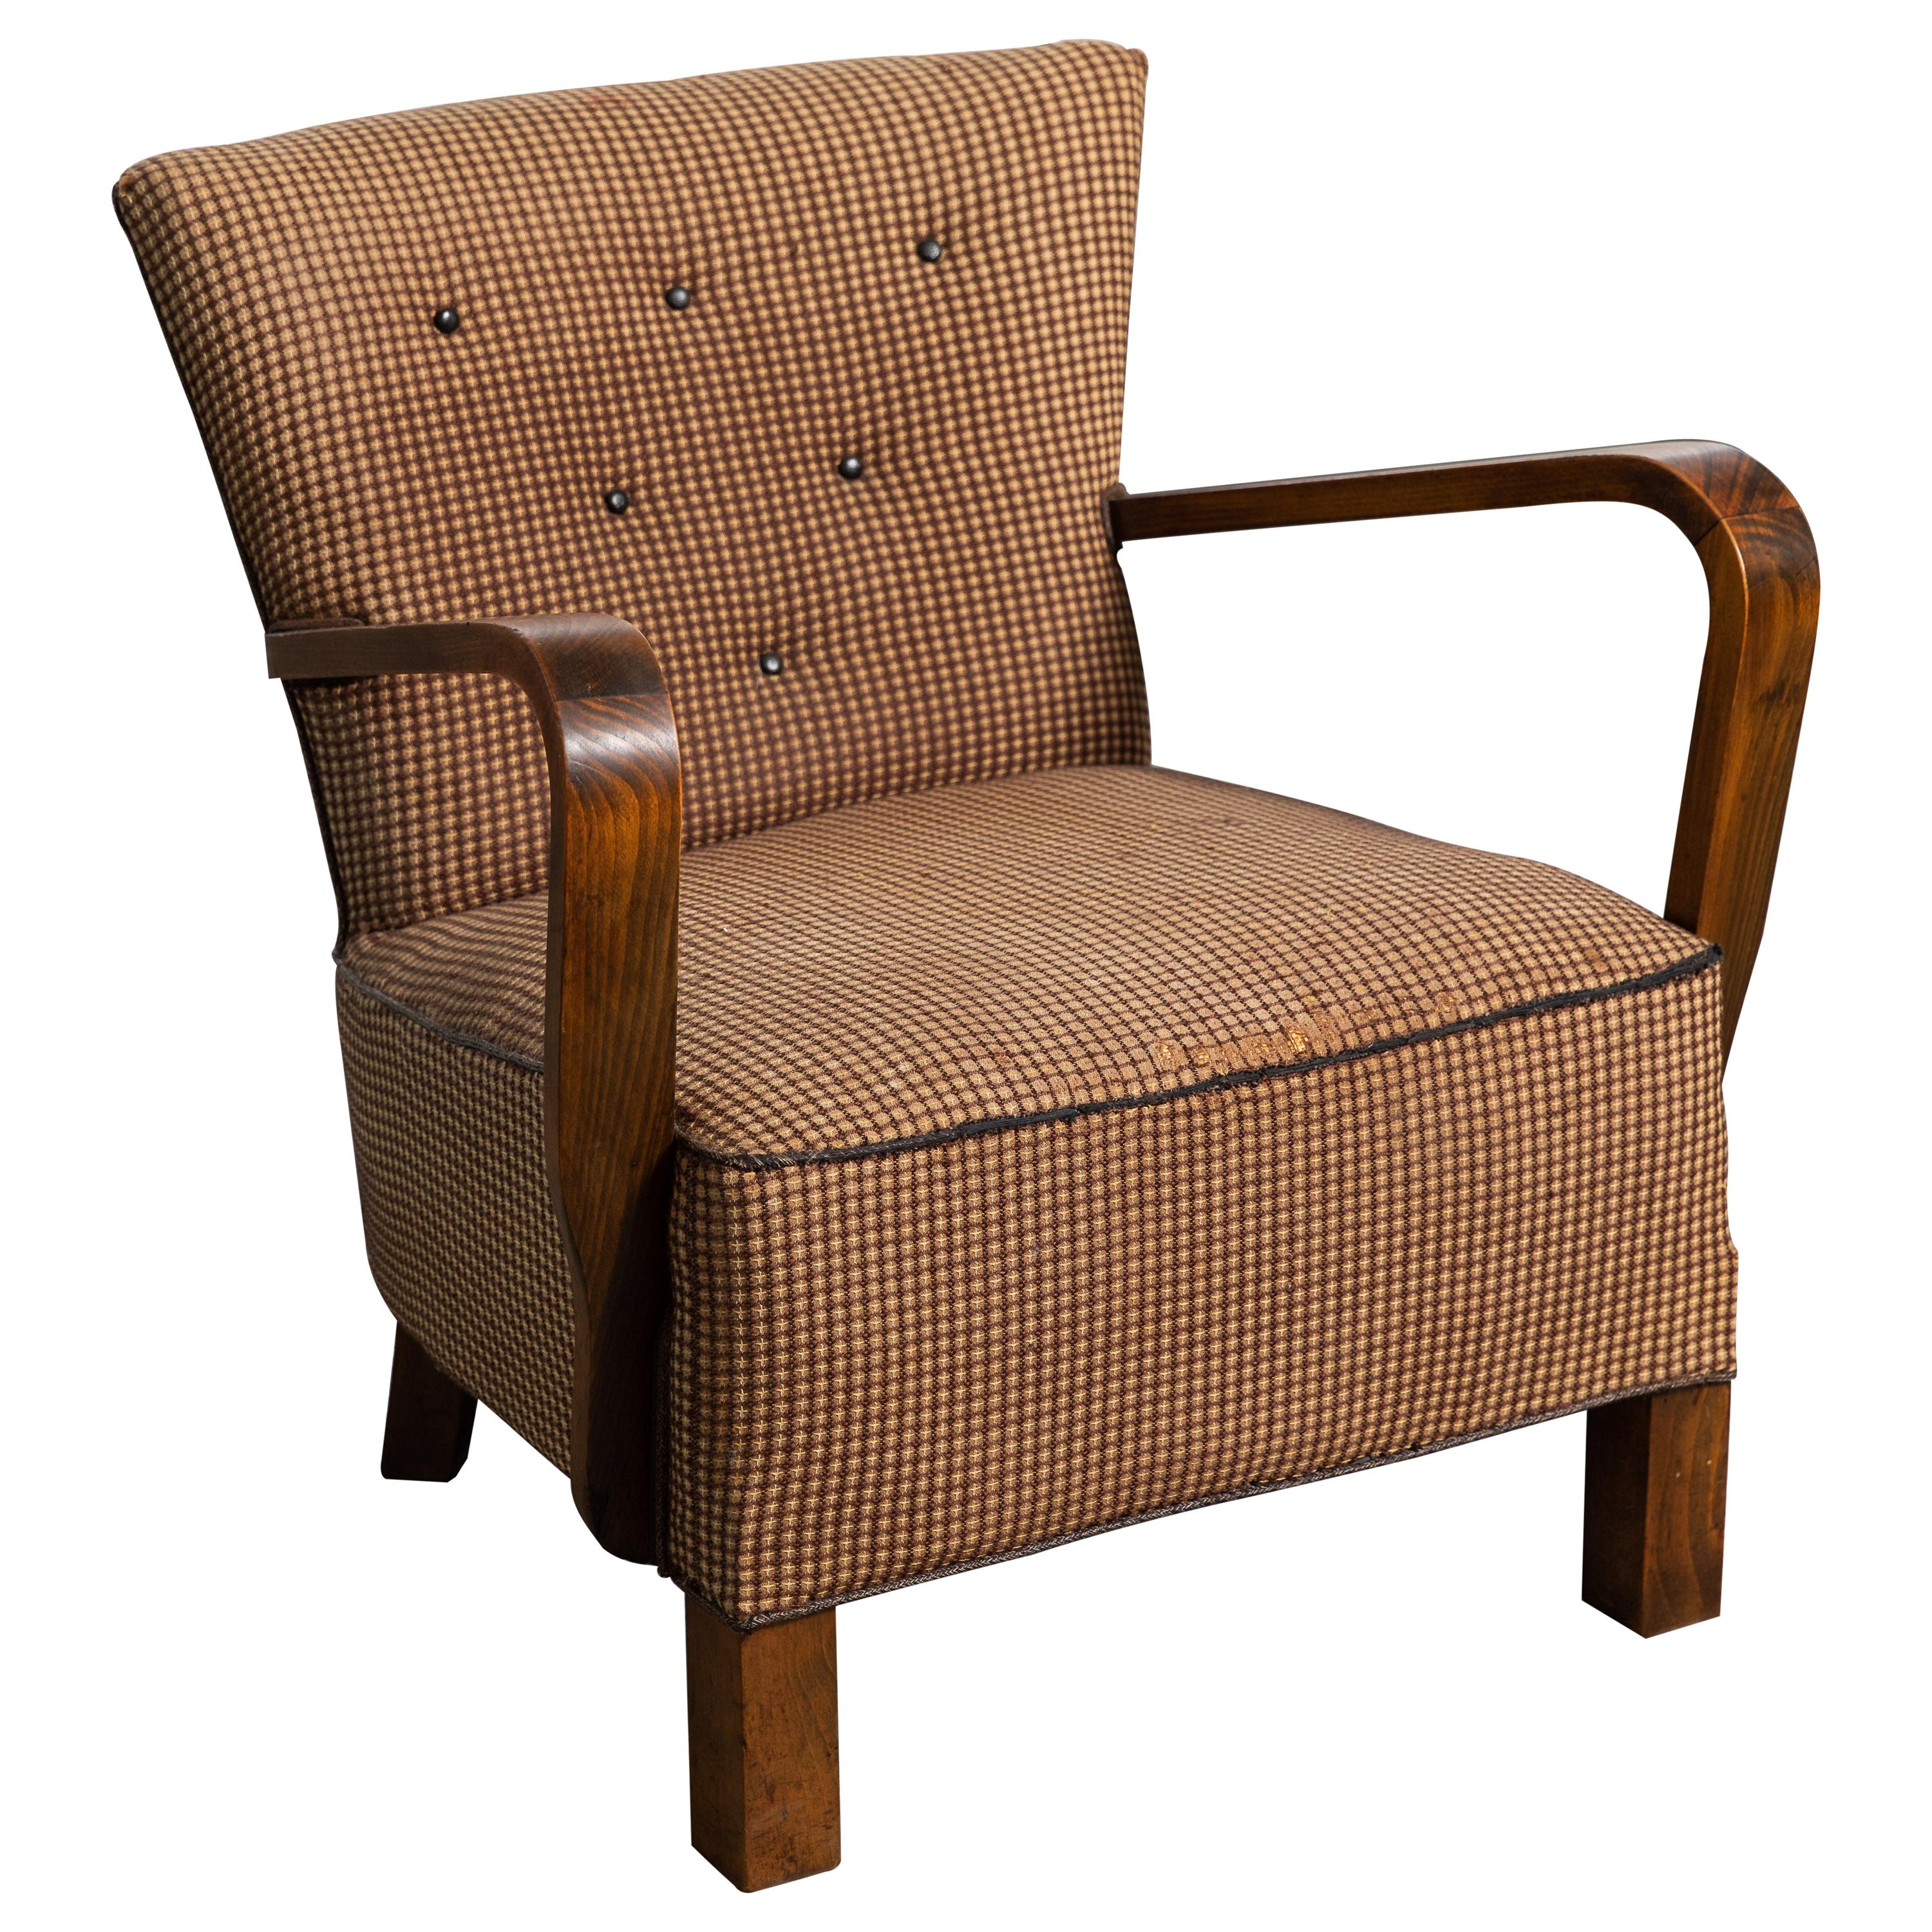 Danish Early Midcentury or Art Deco Low Lounge Chair in Mahogany, 1940s